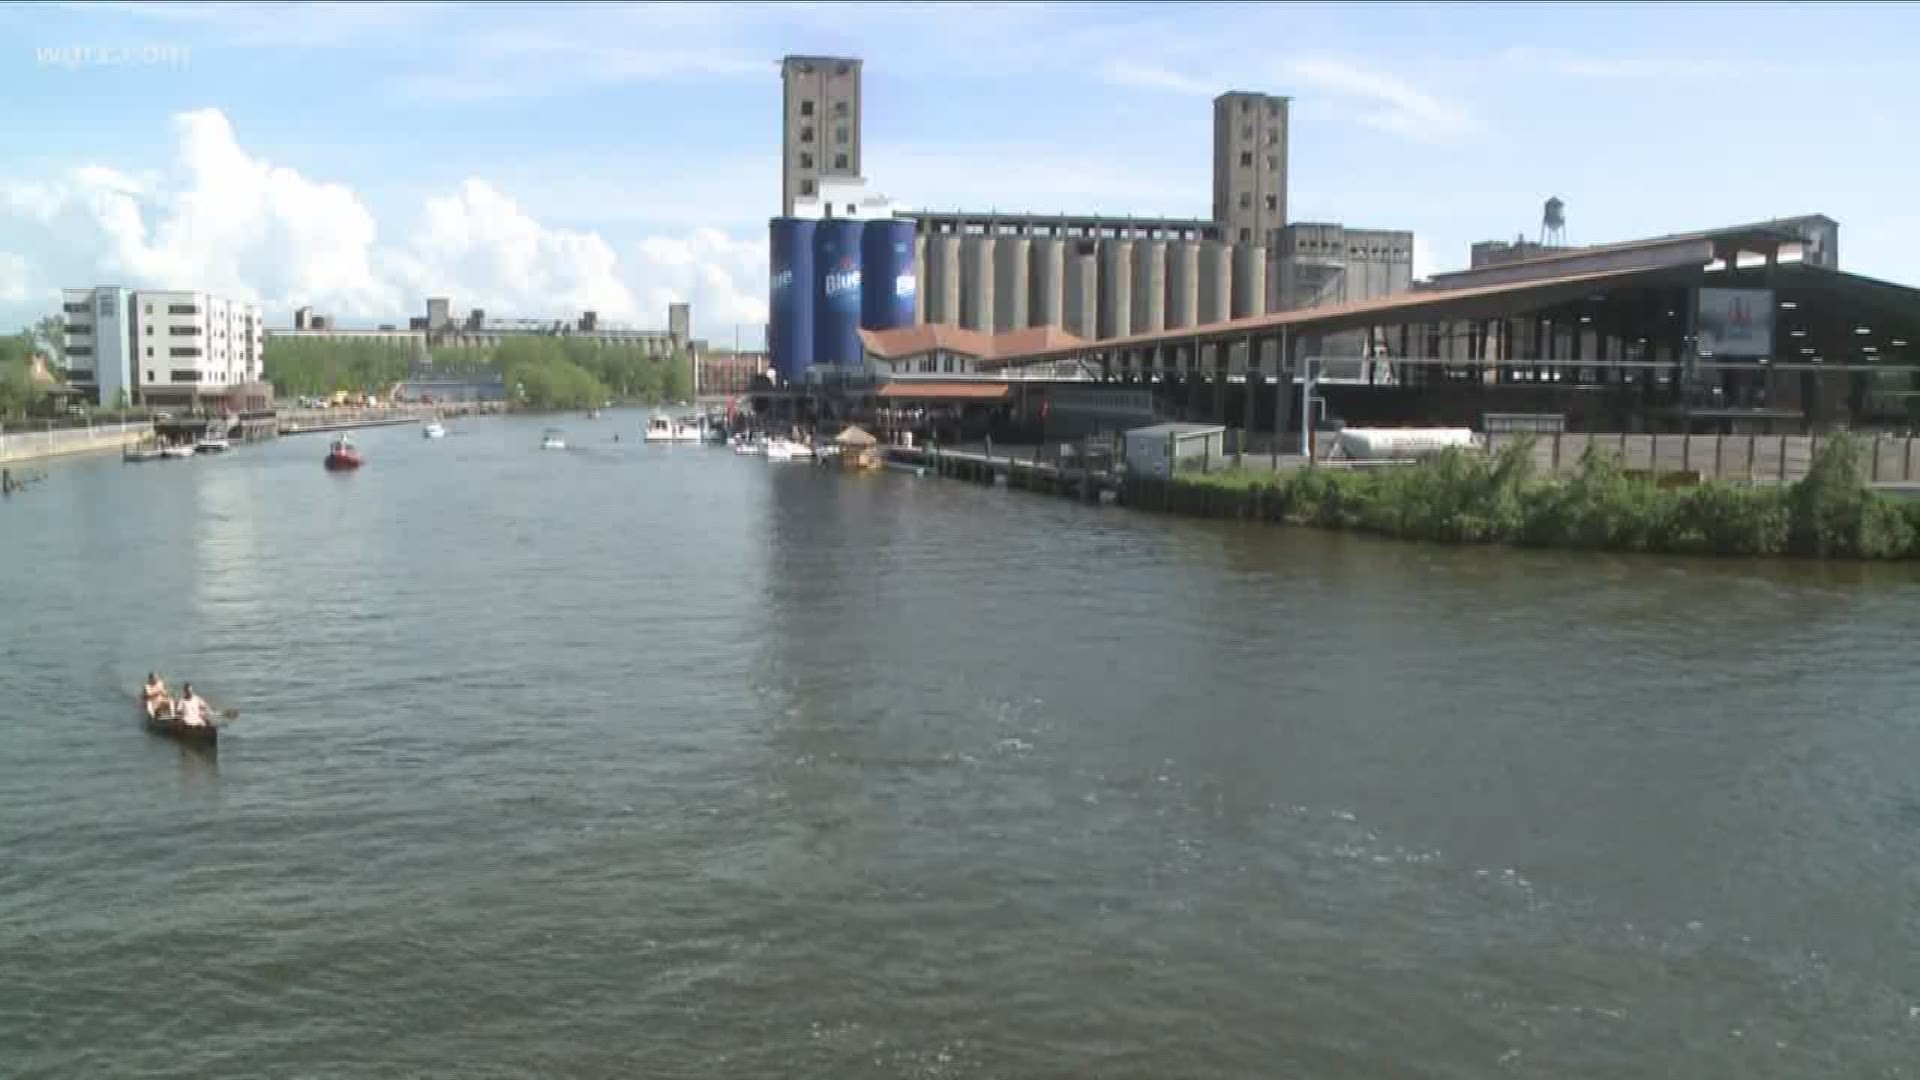 Parts of South Buffalo Seeing Growth